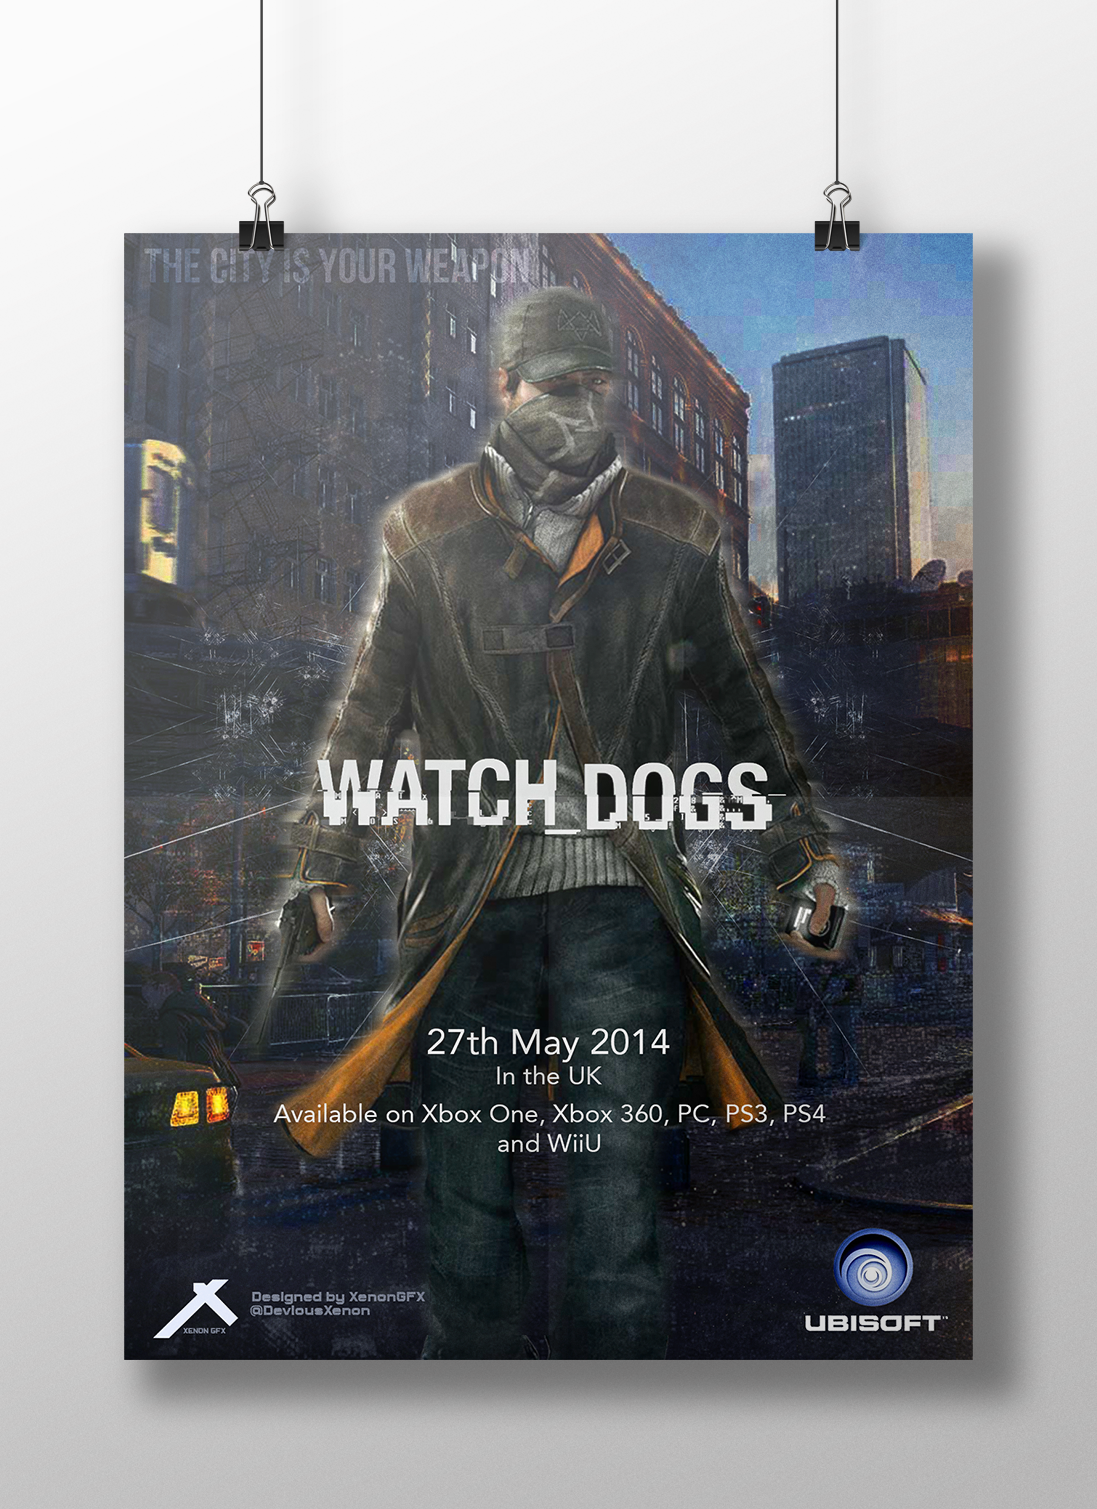 watch dogs watch dog dogs The Game game poster Boxart XBOX 360 gameconsole Gaming